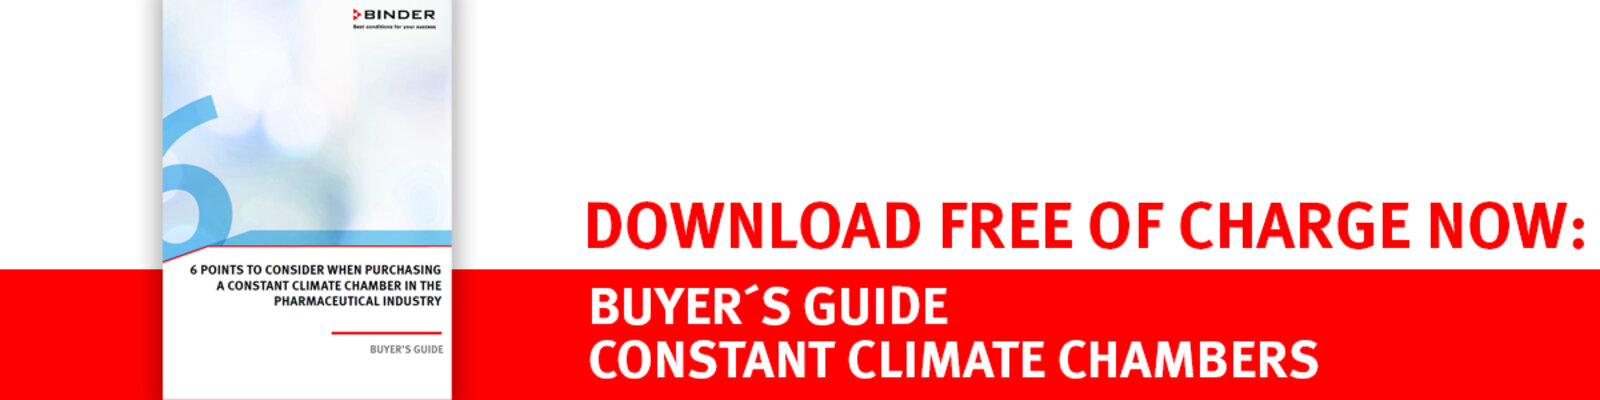 Download free of charge now - Buyer's Guide Constant climate chambers